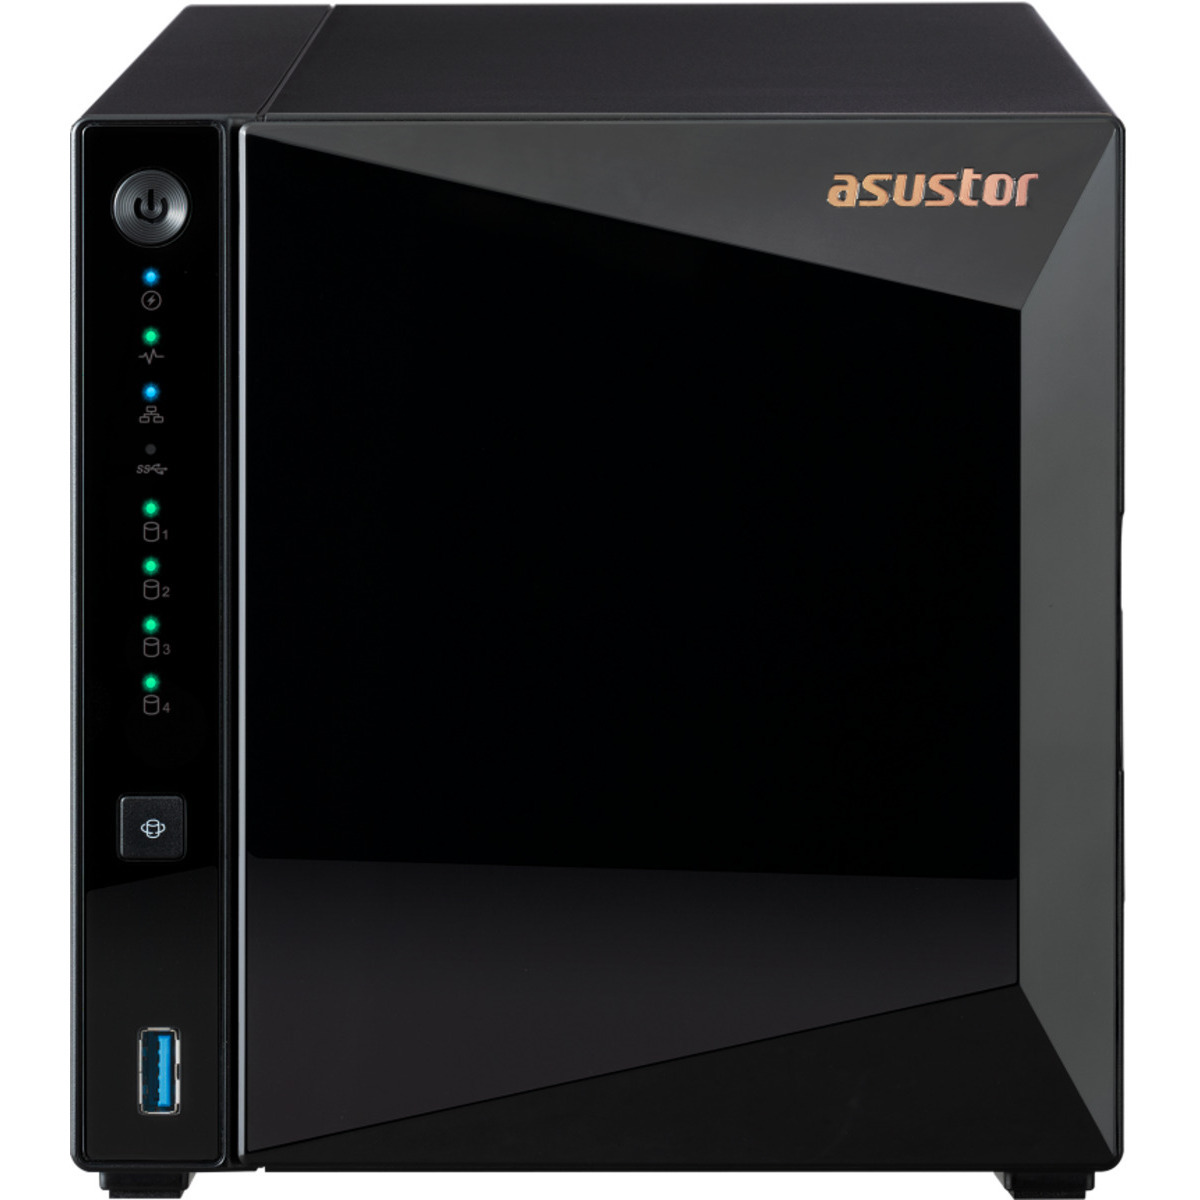 ASUSTOR DRIVESTOR 4 Pro AS3304T 96tb 4-Bay Desktop Personal / Basic Home / Small Office NAS - Network Attached Storage Device 4x24tb Seagate EXOS X24 ST24000NM002H 3.5 7200rpm SATA 6Gb/s HDD ENTERPRISE Class Drives Installed - Burn-In Tested DRIVESTOR 4 Pro AS3304T